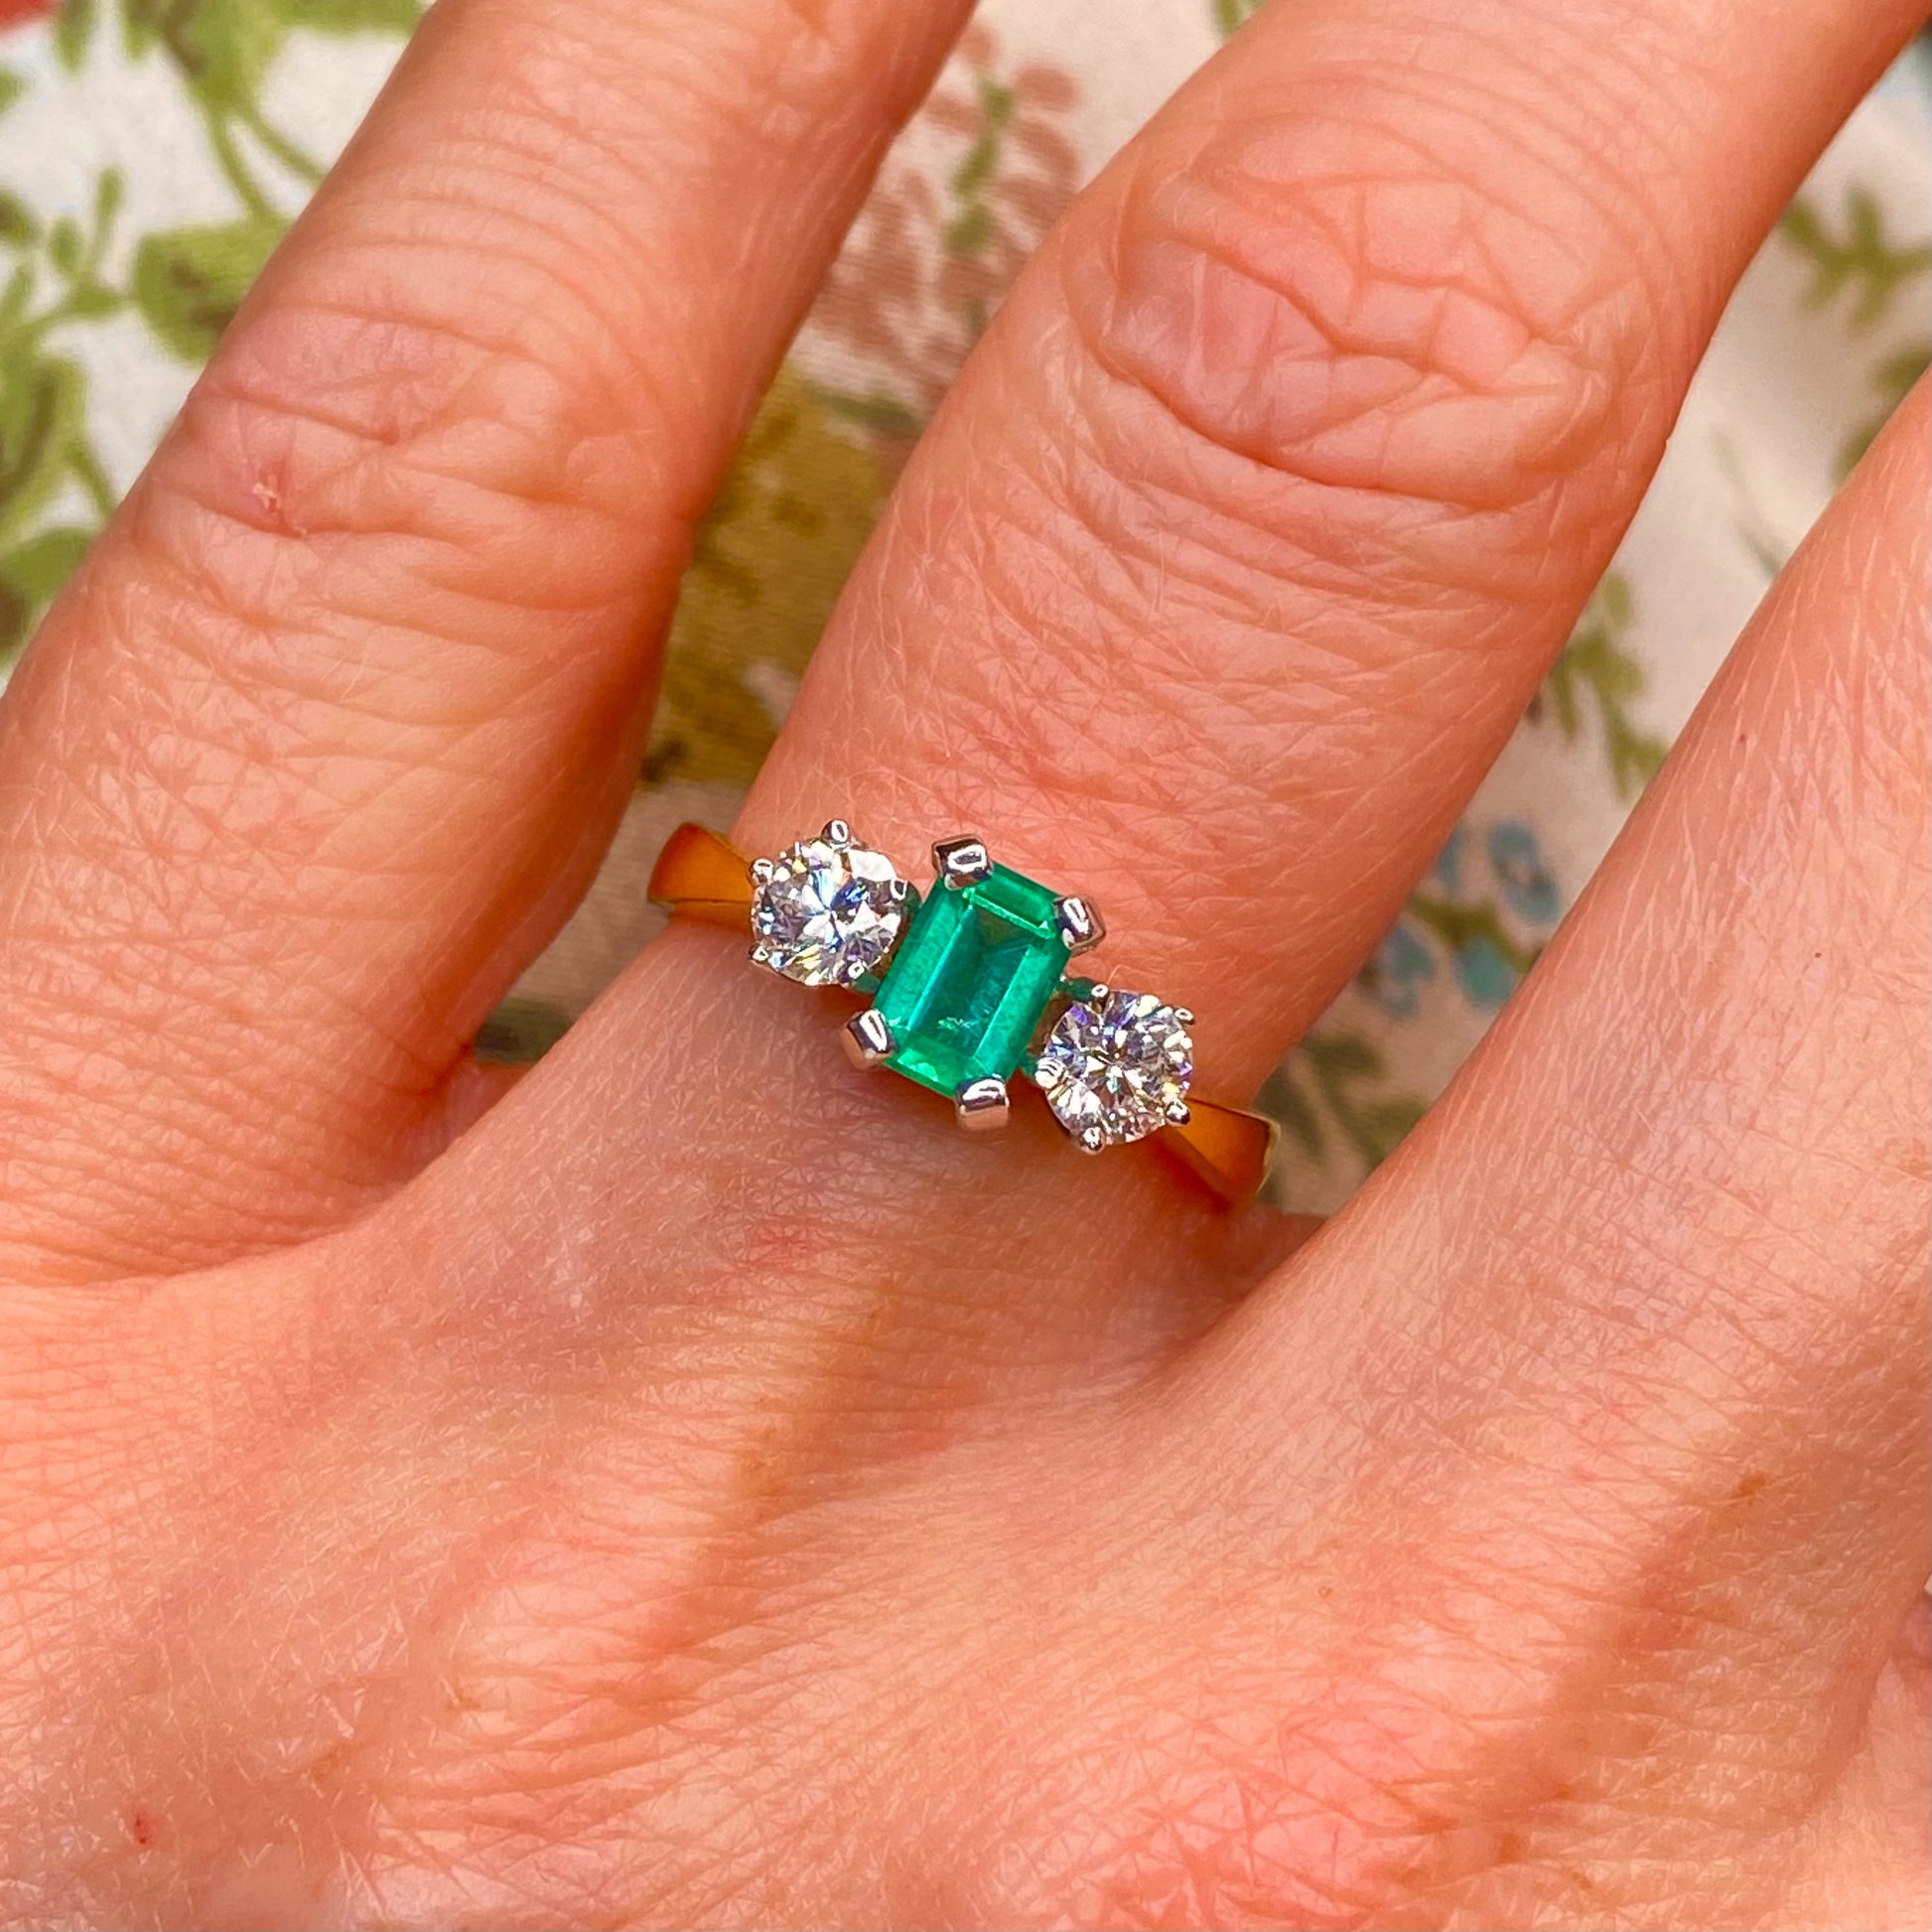 18ct Gold Emerald & Diamond Three Stone Ring  Emerald cut Emerald: 4mm x 6.2mm 0.77ct set in 18ct white gold   Diamonds: 0.54ct H SI set in 18ct white gold  Setting dimensions: 13.6 mm x 7mm  Setting height: 6.2mm  2.8mm shank, Size O 18ct yellow gold   18ct yellow gold   Made in Ireland - Handmade